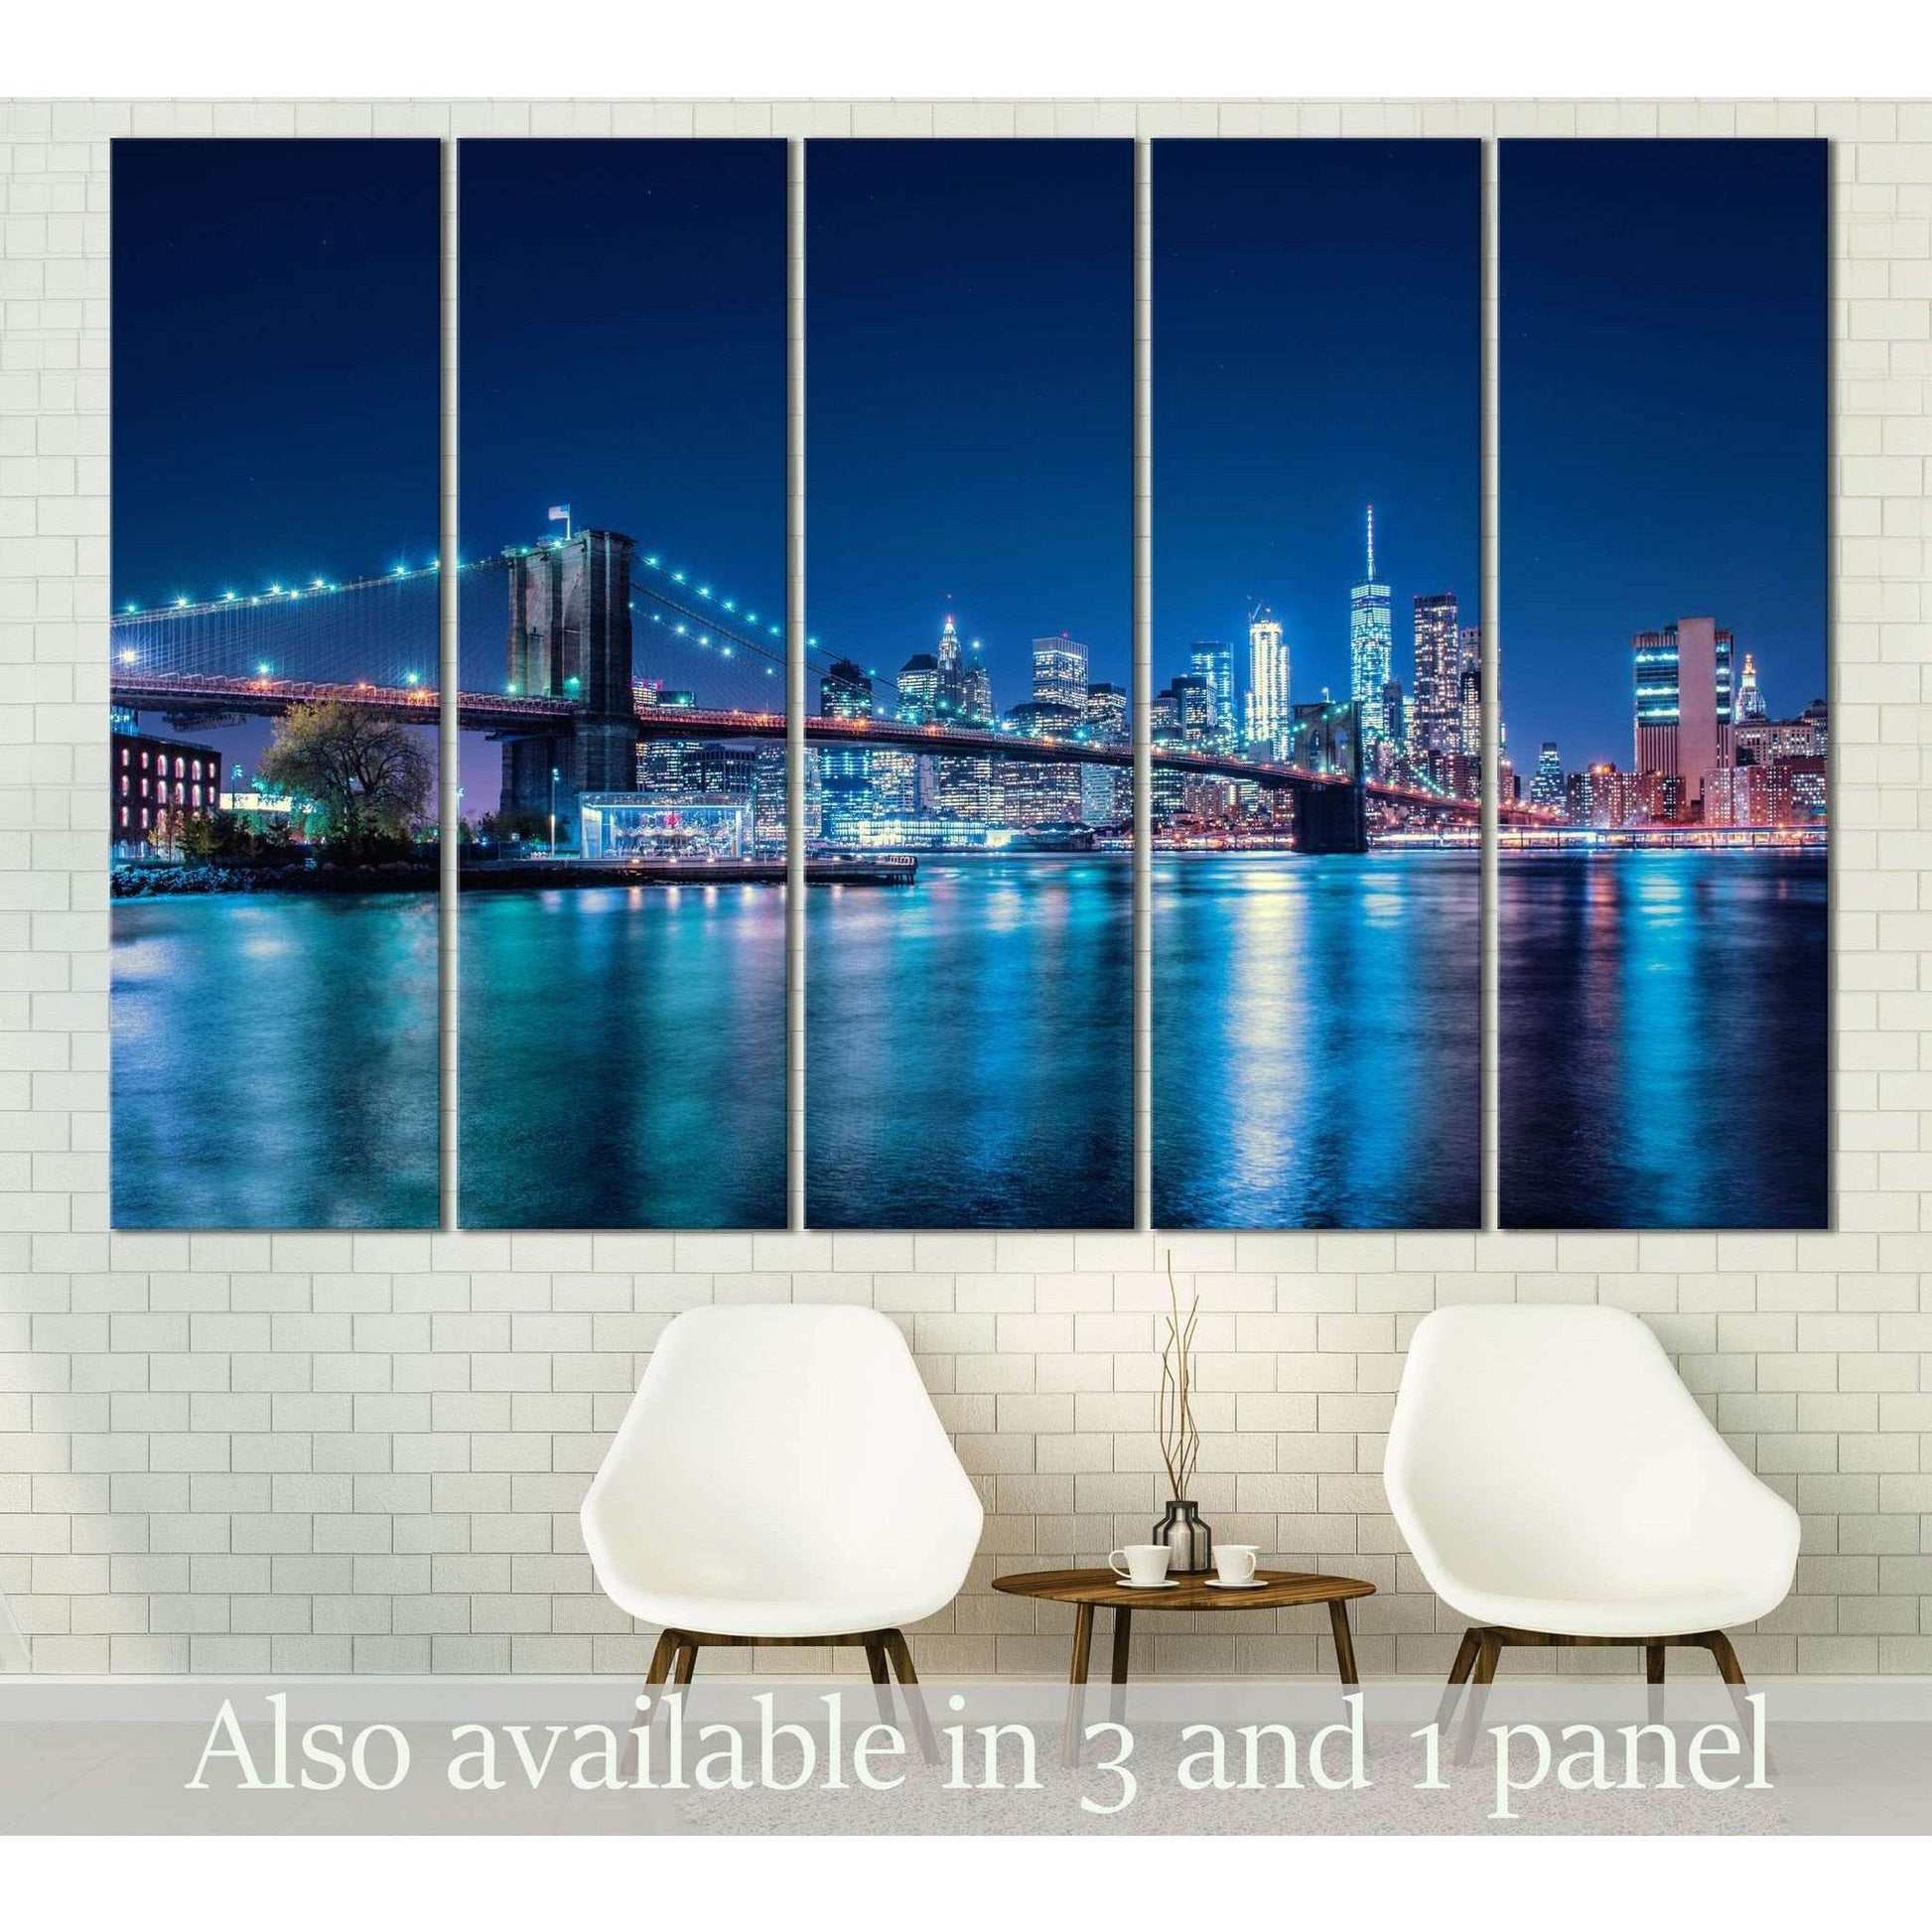 Brooklyn Bridge at Night Wall Decor SetDecorate your walls with a stunning Brooklyn Bridge Canvas Art Print from the world's largest art gallery. Choose from thousands of Brooklyn Bridge artworks with various sizing options. Choose your perfect art print